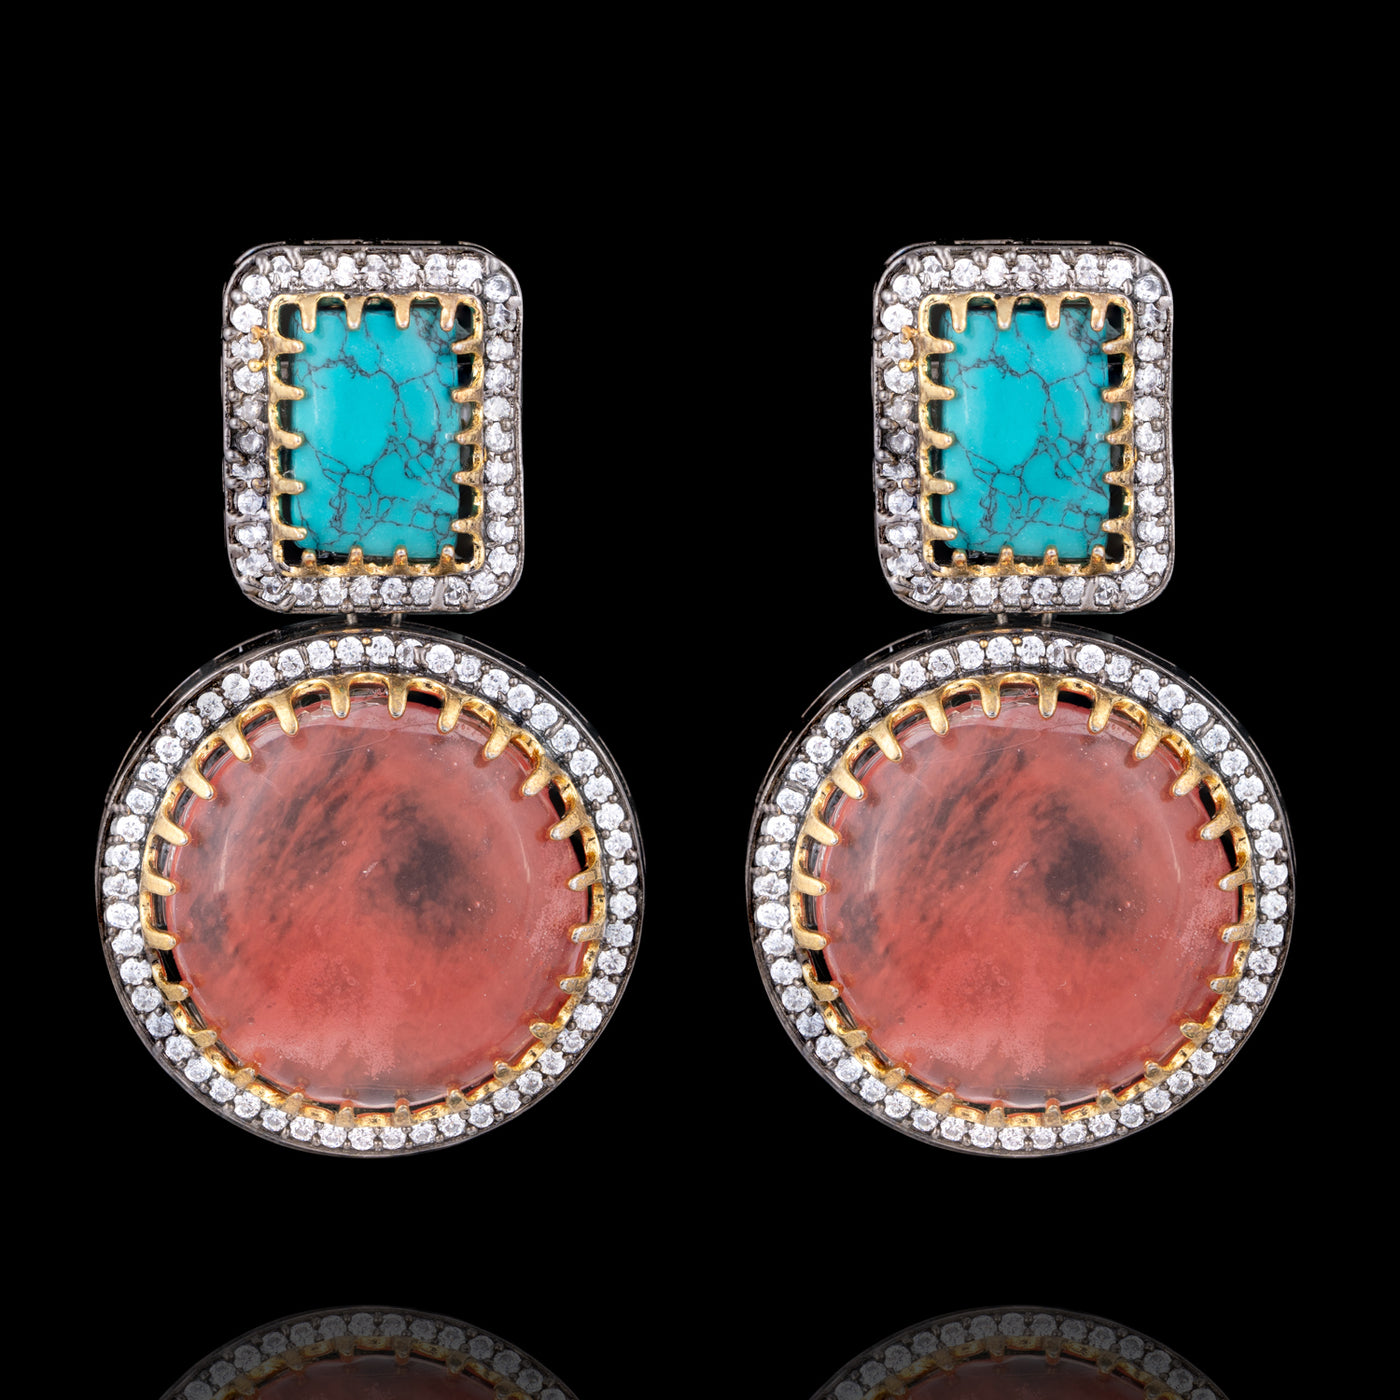 Sabah Earrings - Available in 2 Colors